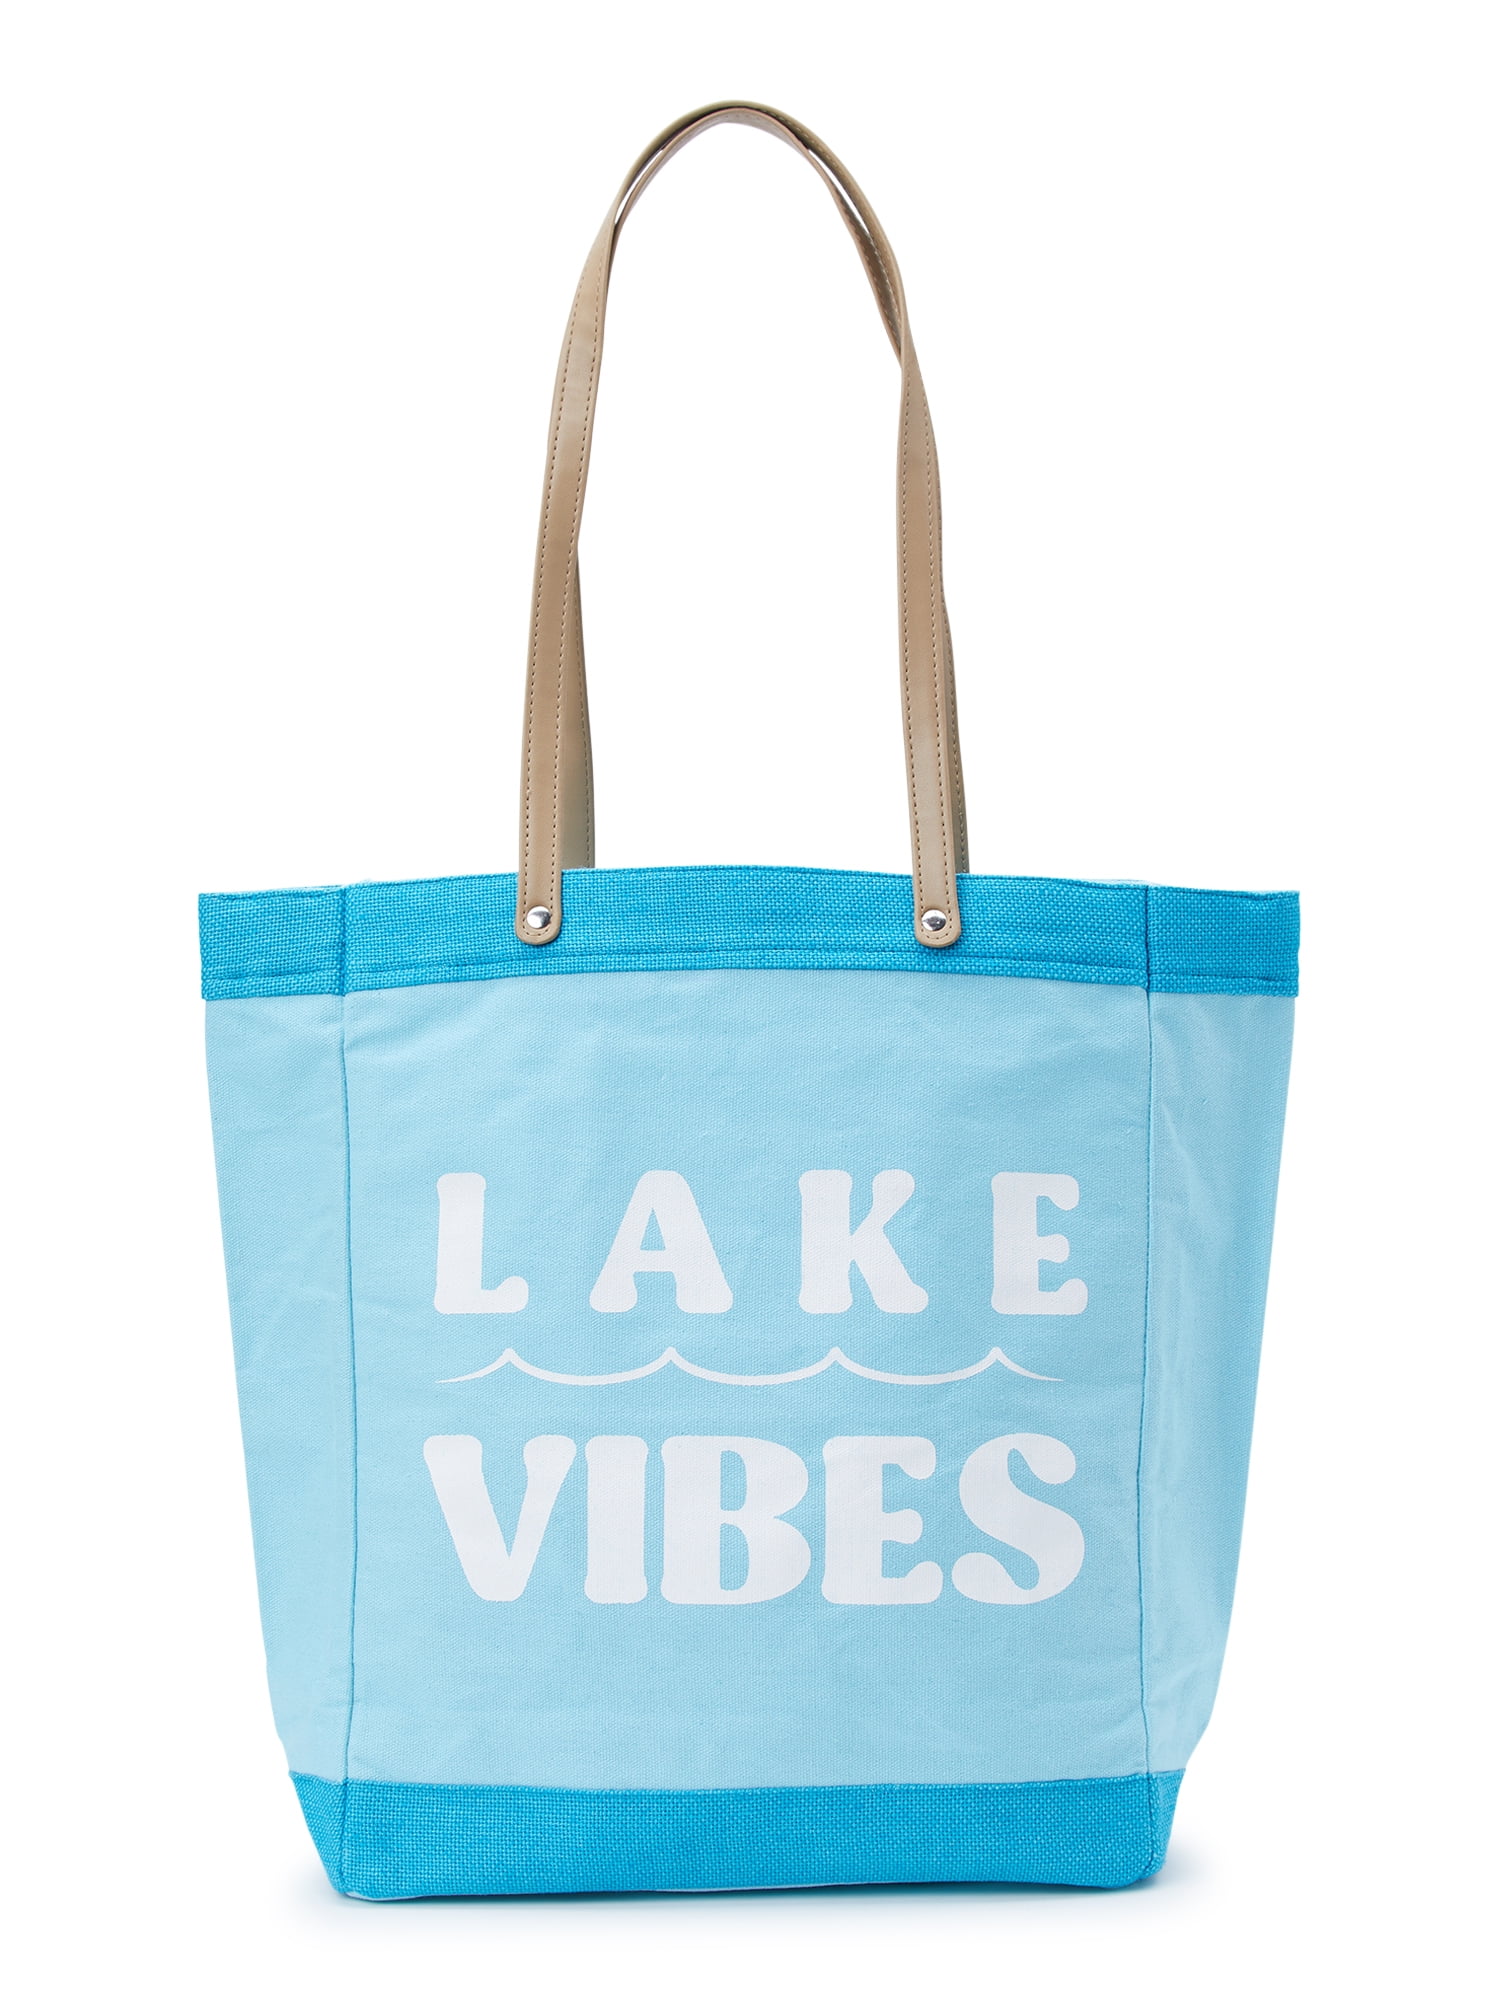 Quirky quote Tote bag, Printed Multipurpose Bags, Eco-Friendly Tote Bag  for Work, Beach, Travel and Shopping